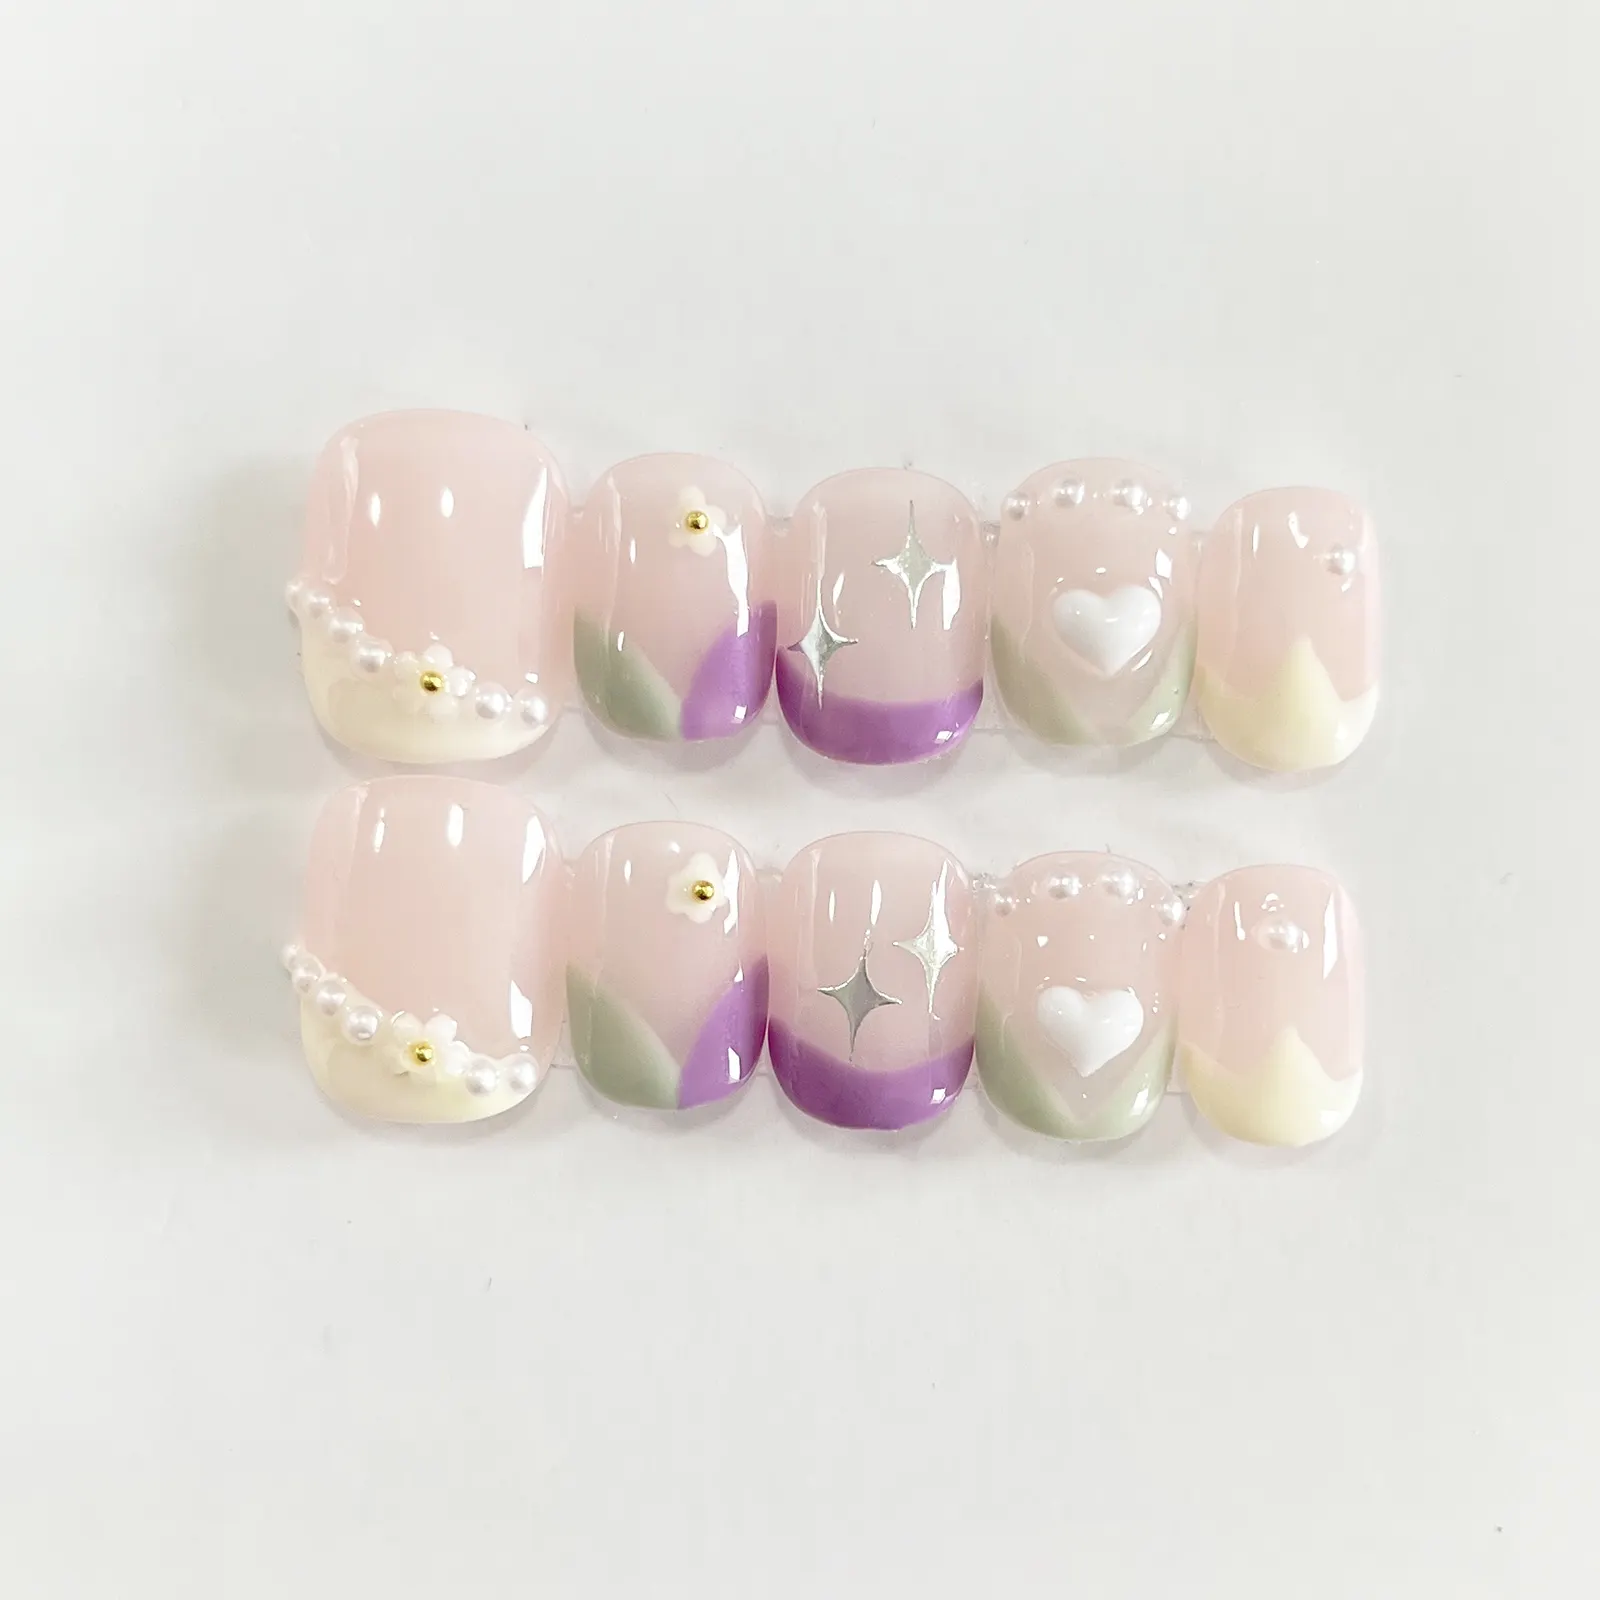 Lovely Fantasy Short Square Nude False Nails with Purple French and Pearl Design Full Cover High Quality Press On Nails